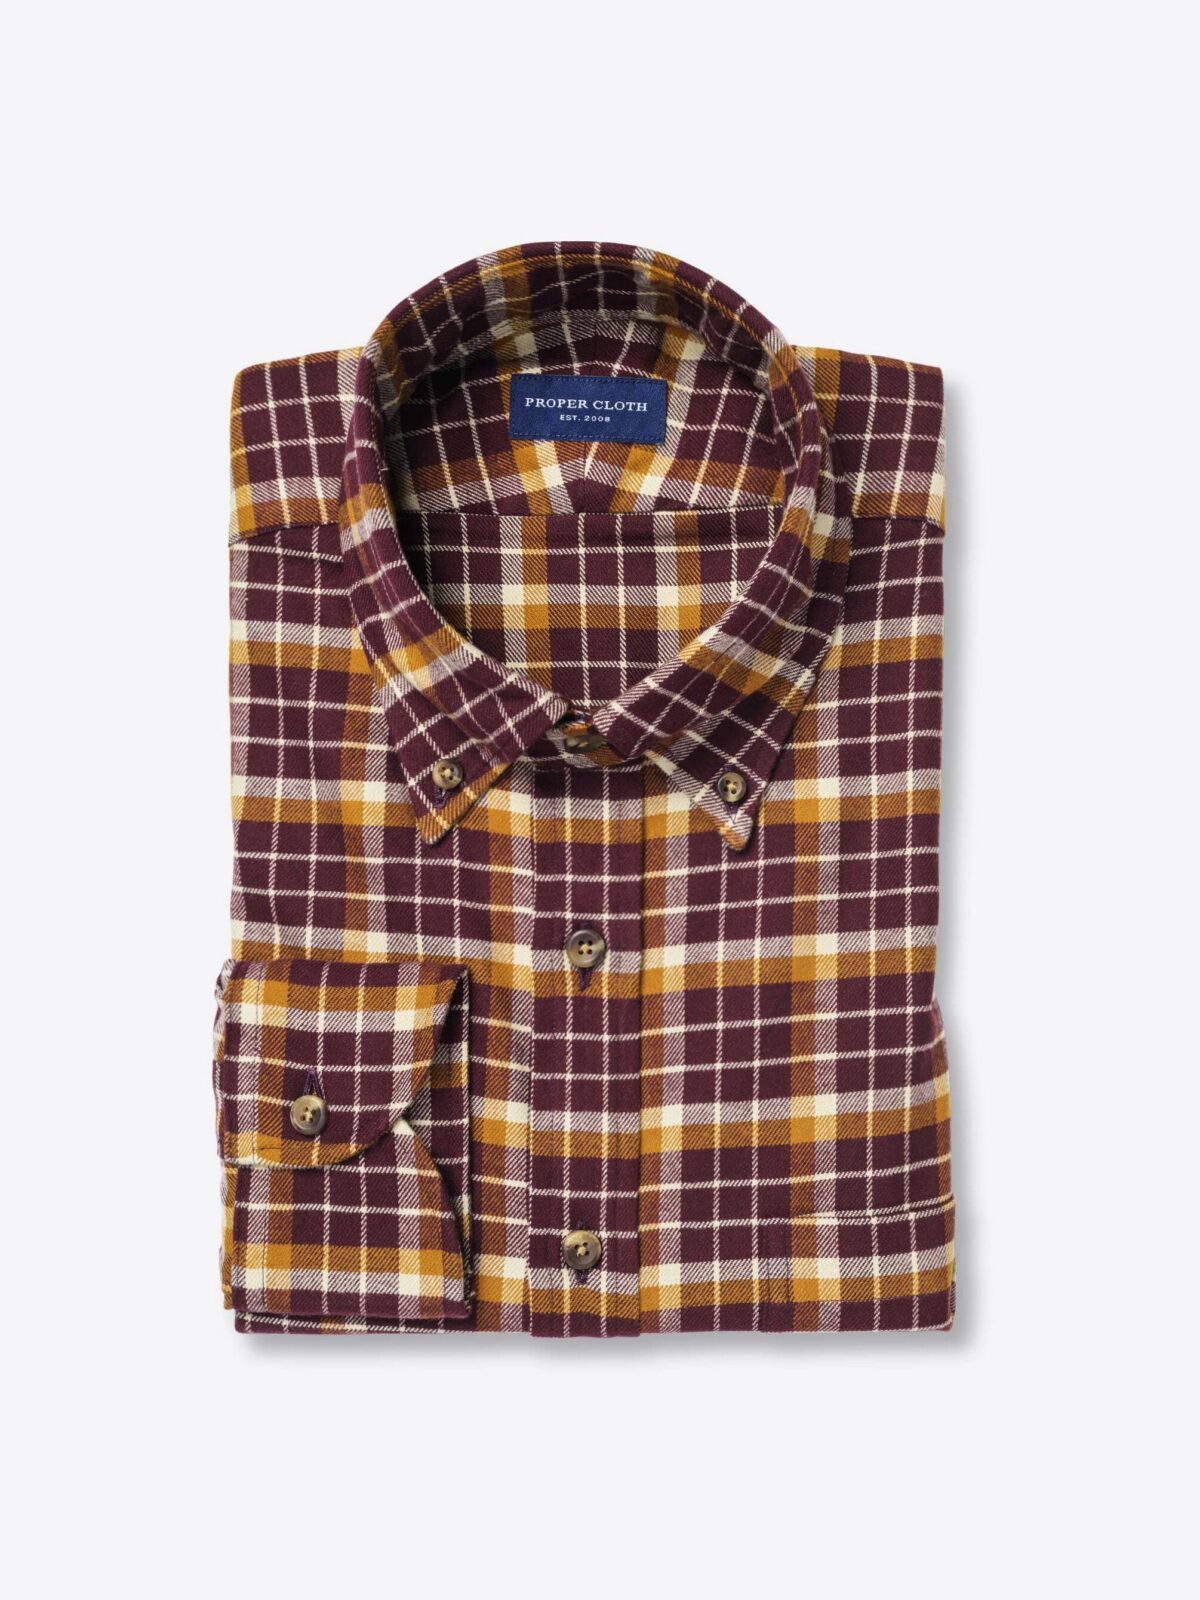 Stowe Burgundy and Gold Check Flannel Shirt by Proper Cloth